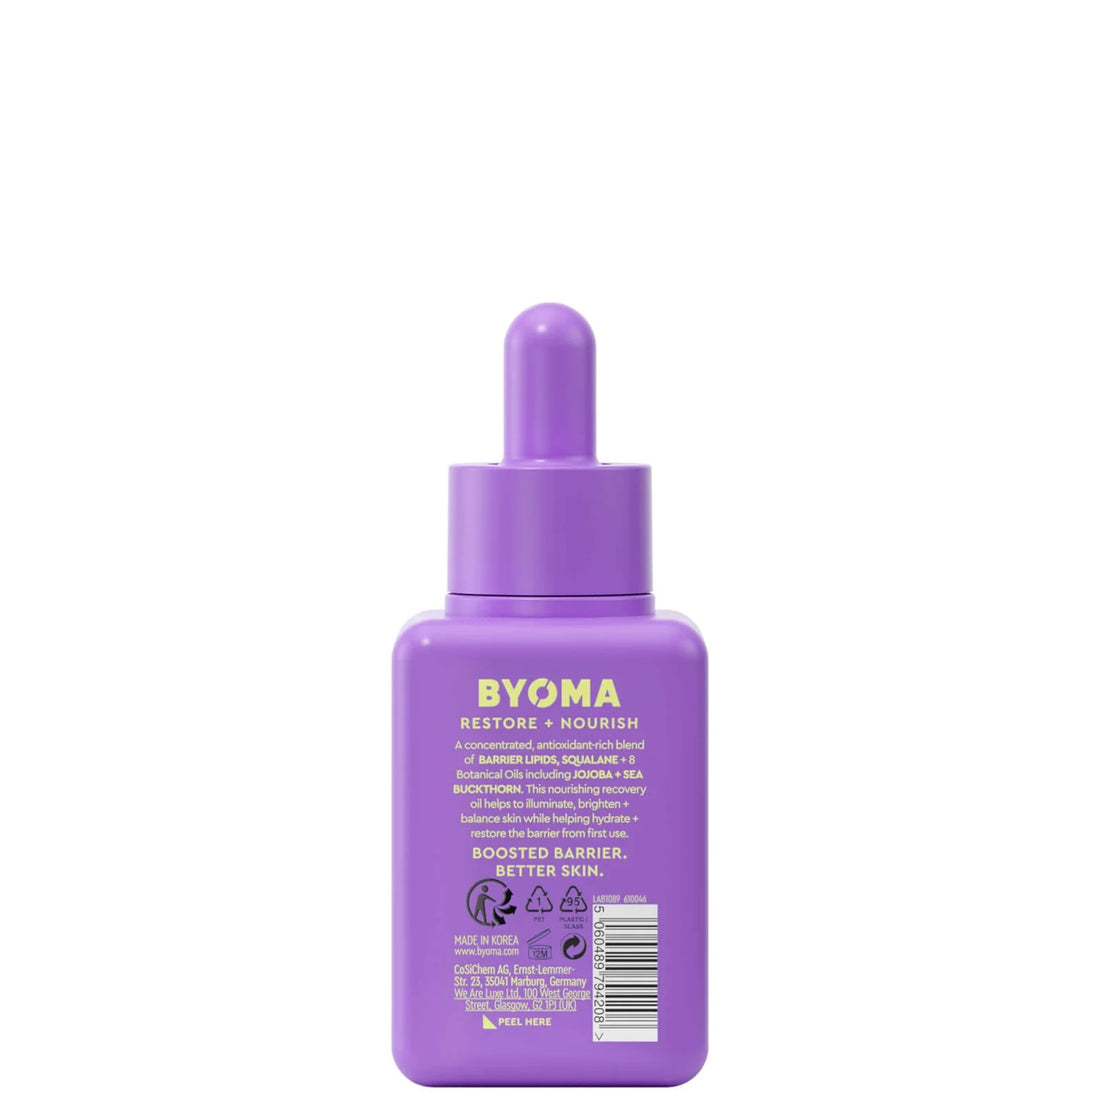 Byoma Hydrating Recovery Oil 30ml